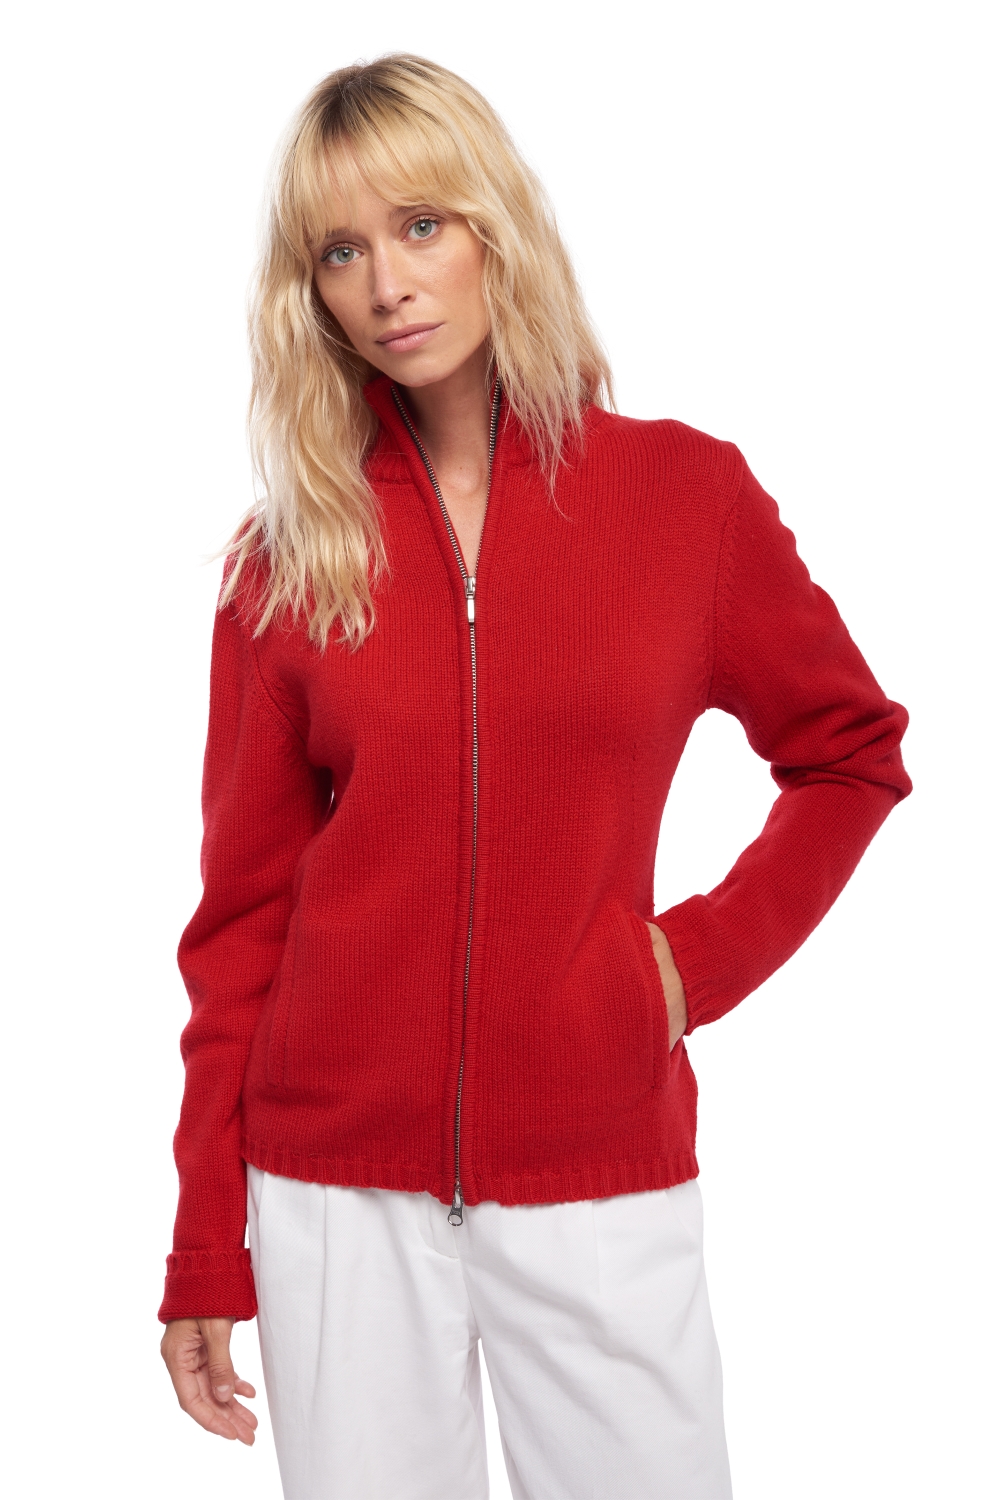 Cashmere ladies timeless classics elodie blood red xl